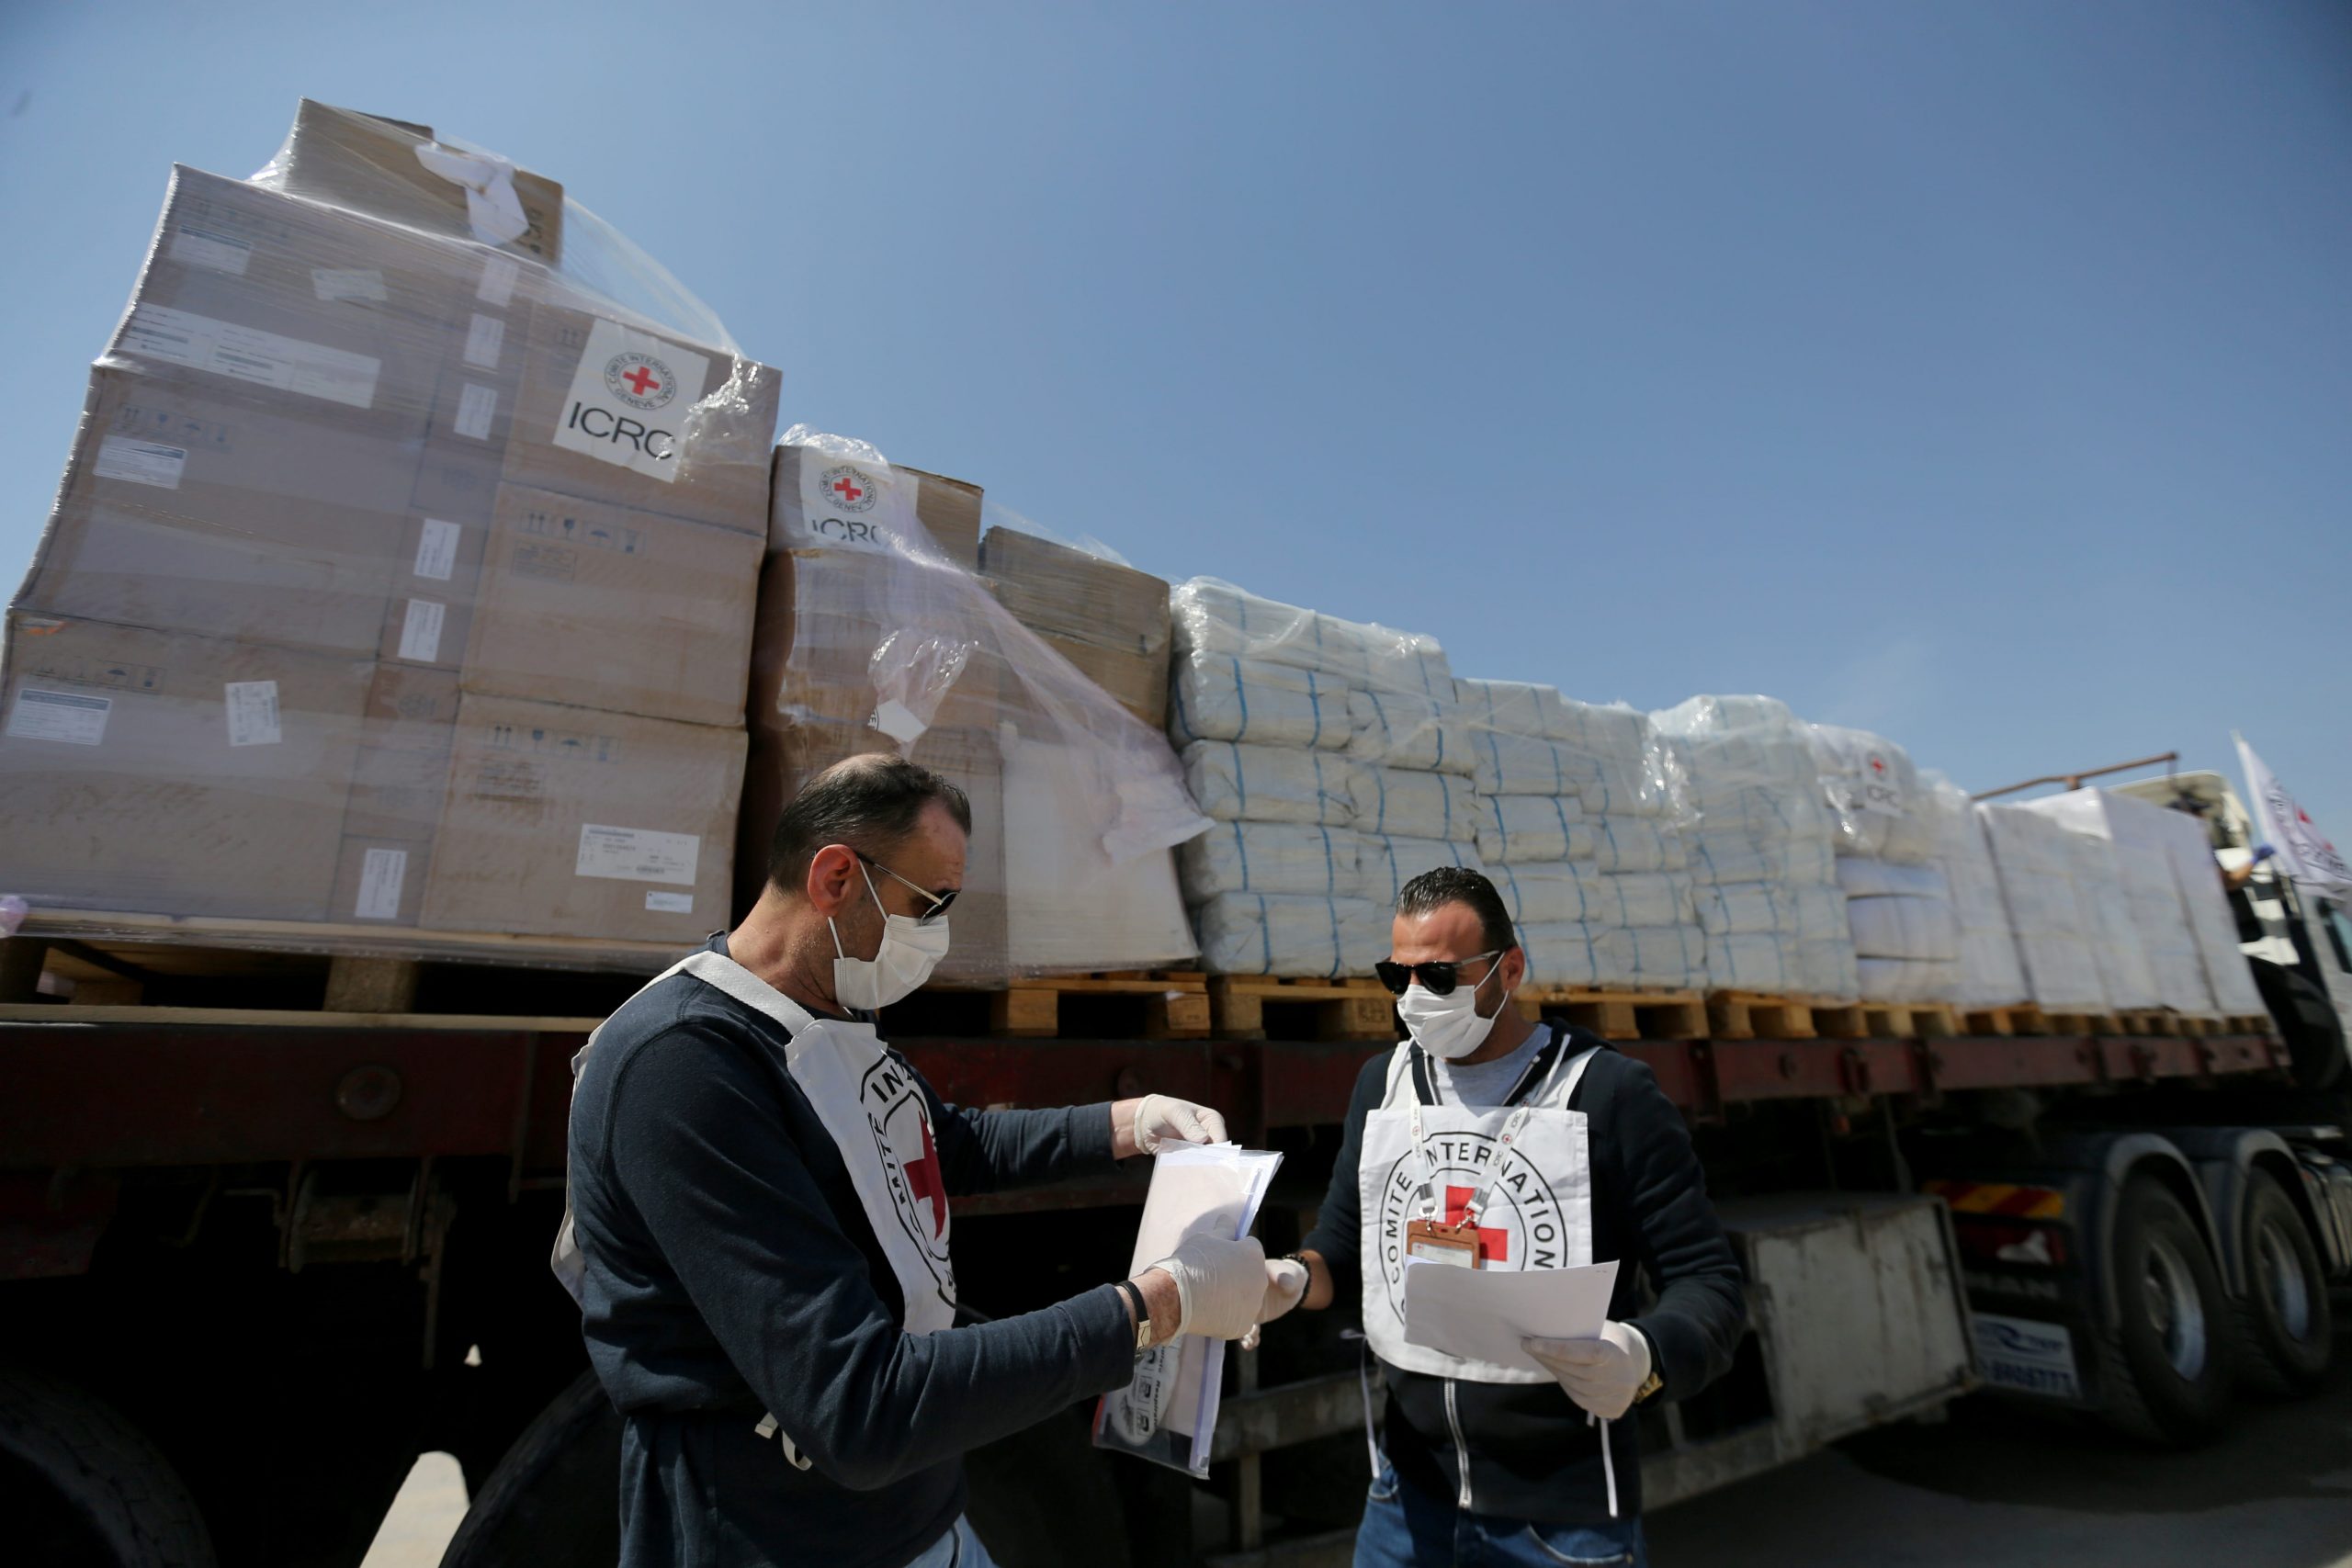 Palestinian workers check medical equipment donated by the International Committee of the Red Cross (ICRC) amid concerns about the spread of the coronavirus disease (COVID-19), at Kerem Shalom crossing in the southern Gaza Strip April 21, 2020.  REUTERS/Ibraheem Abu Mustafa